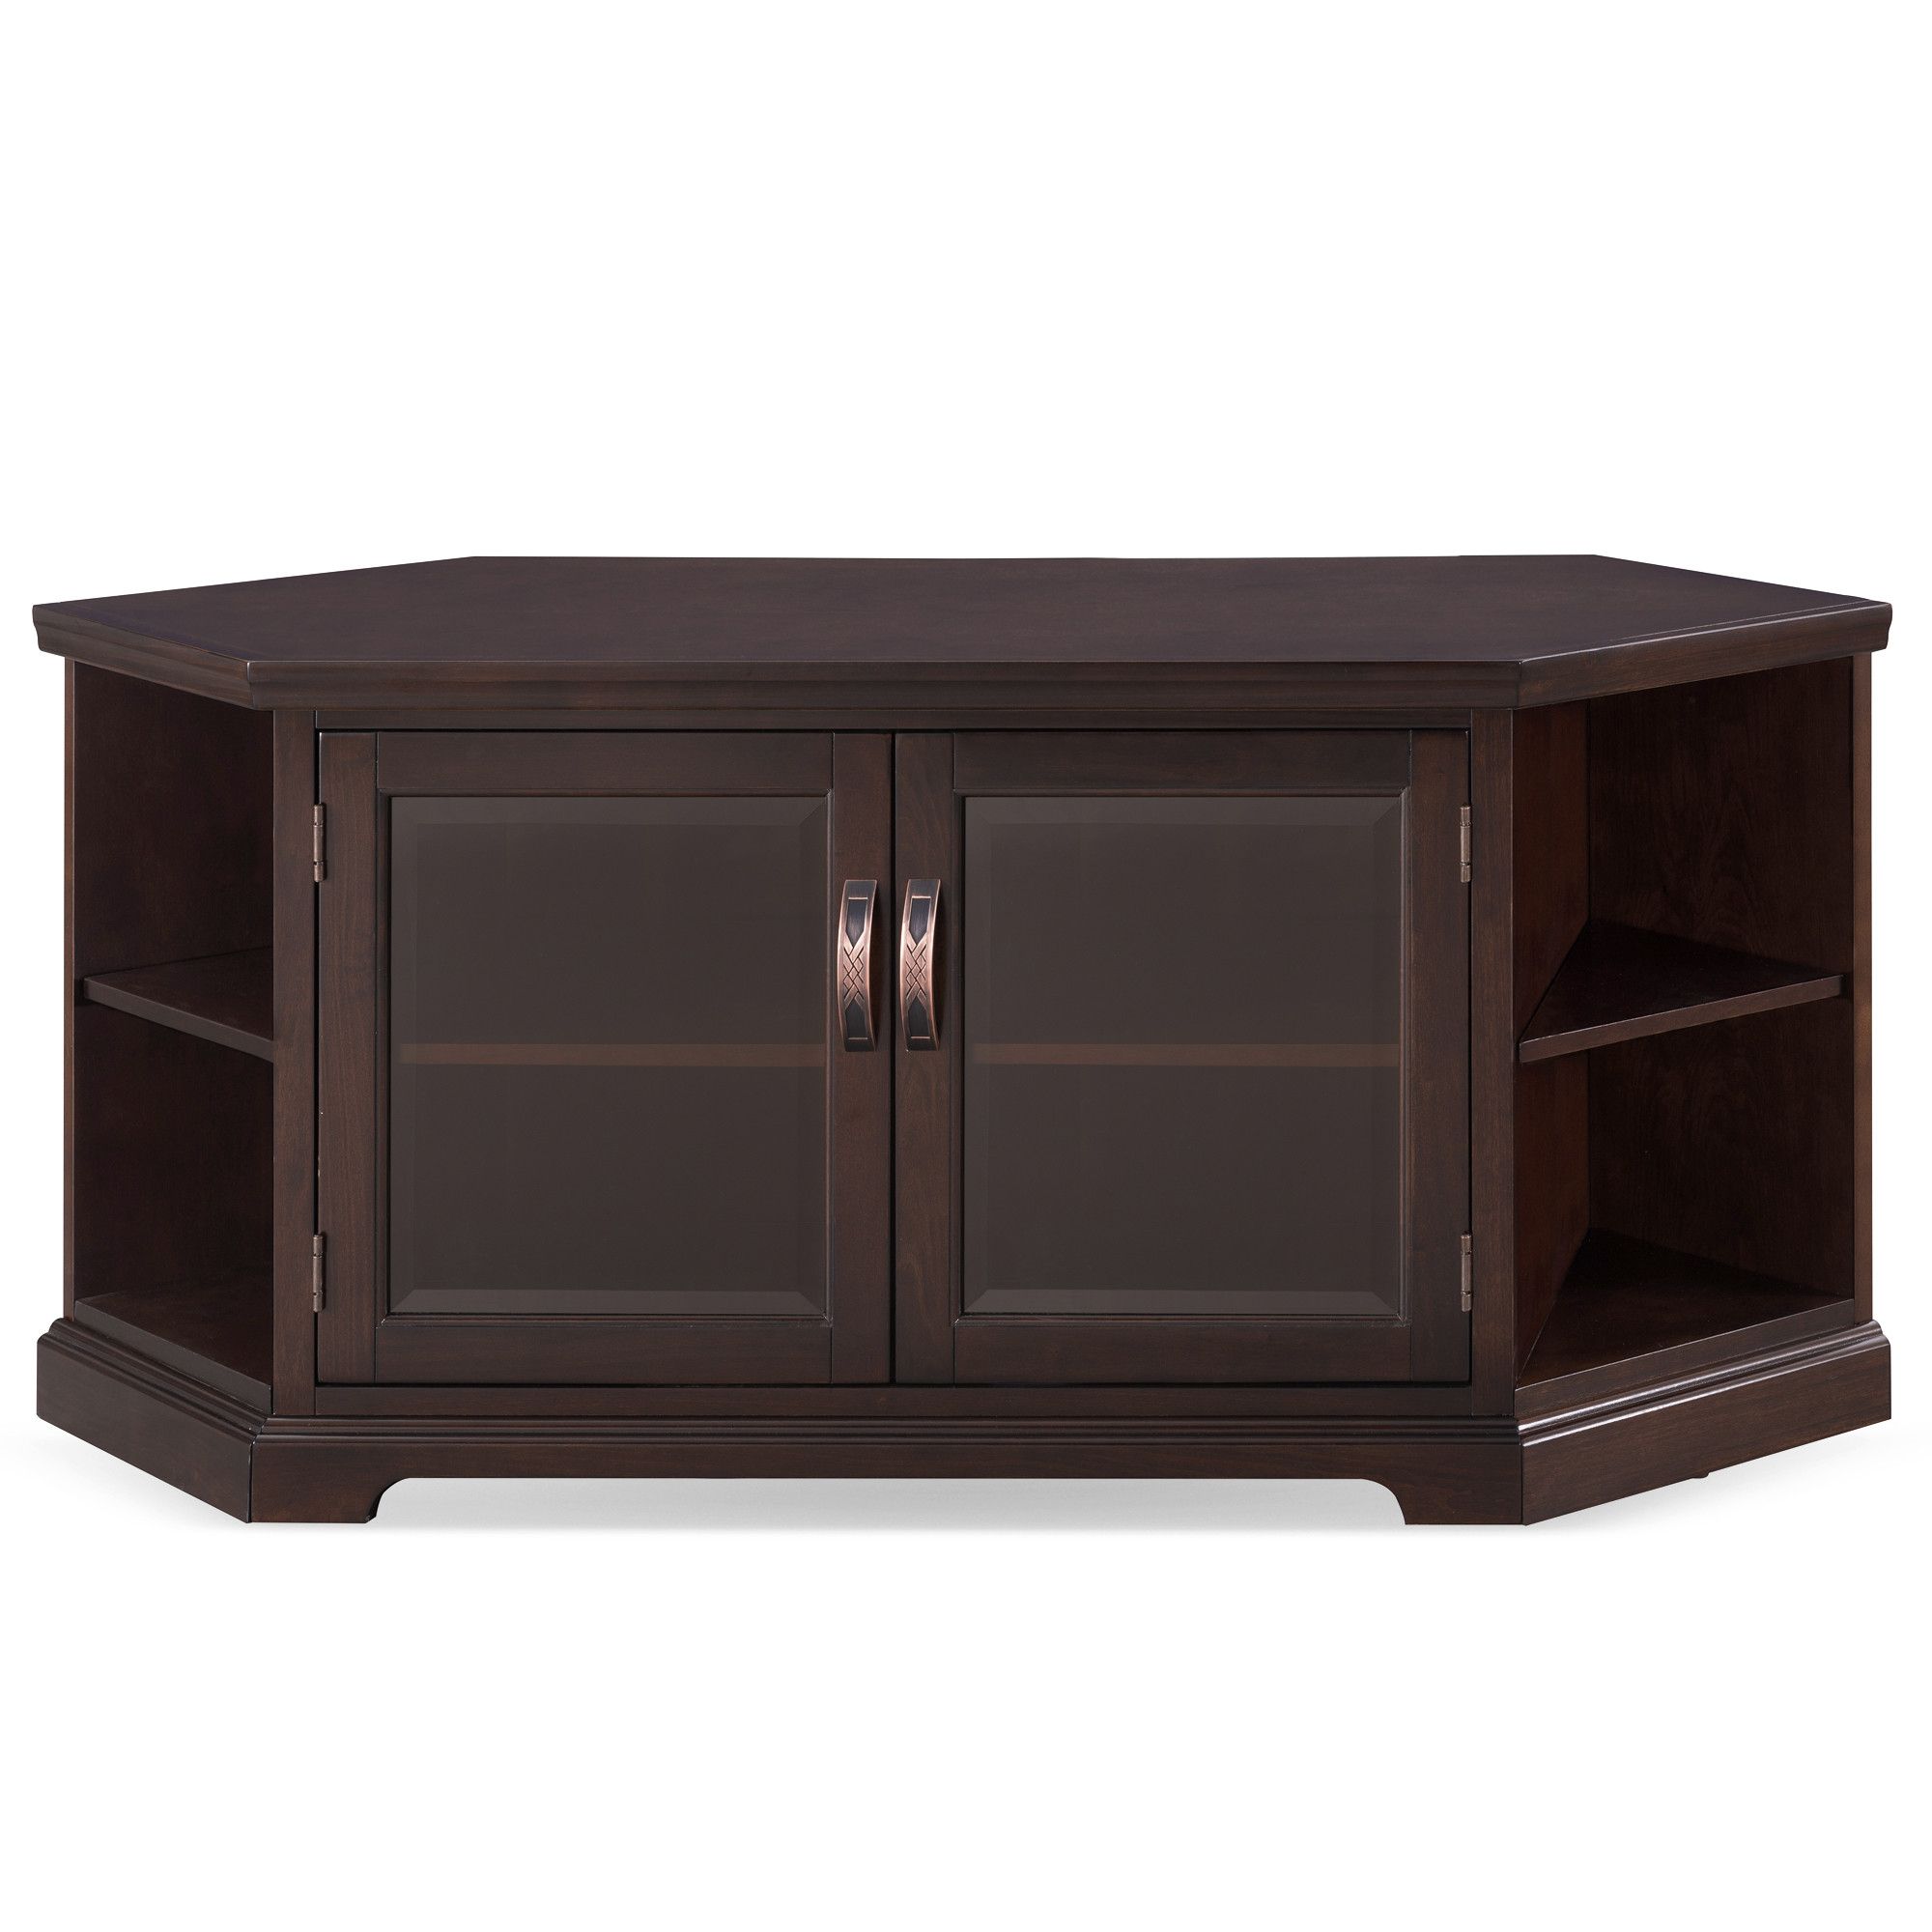 Chocolate Cherry & Bronze Glass Corner Tv Stand With Intended For Exhibit Corner Tv Stands (View 4 of 20)